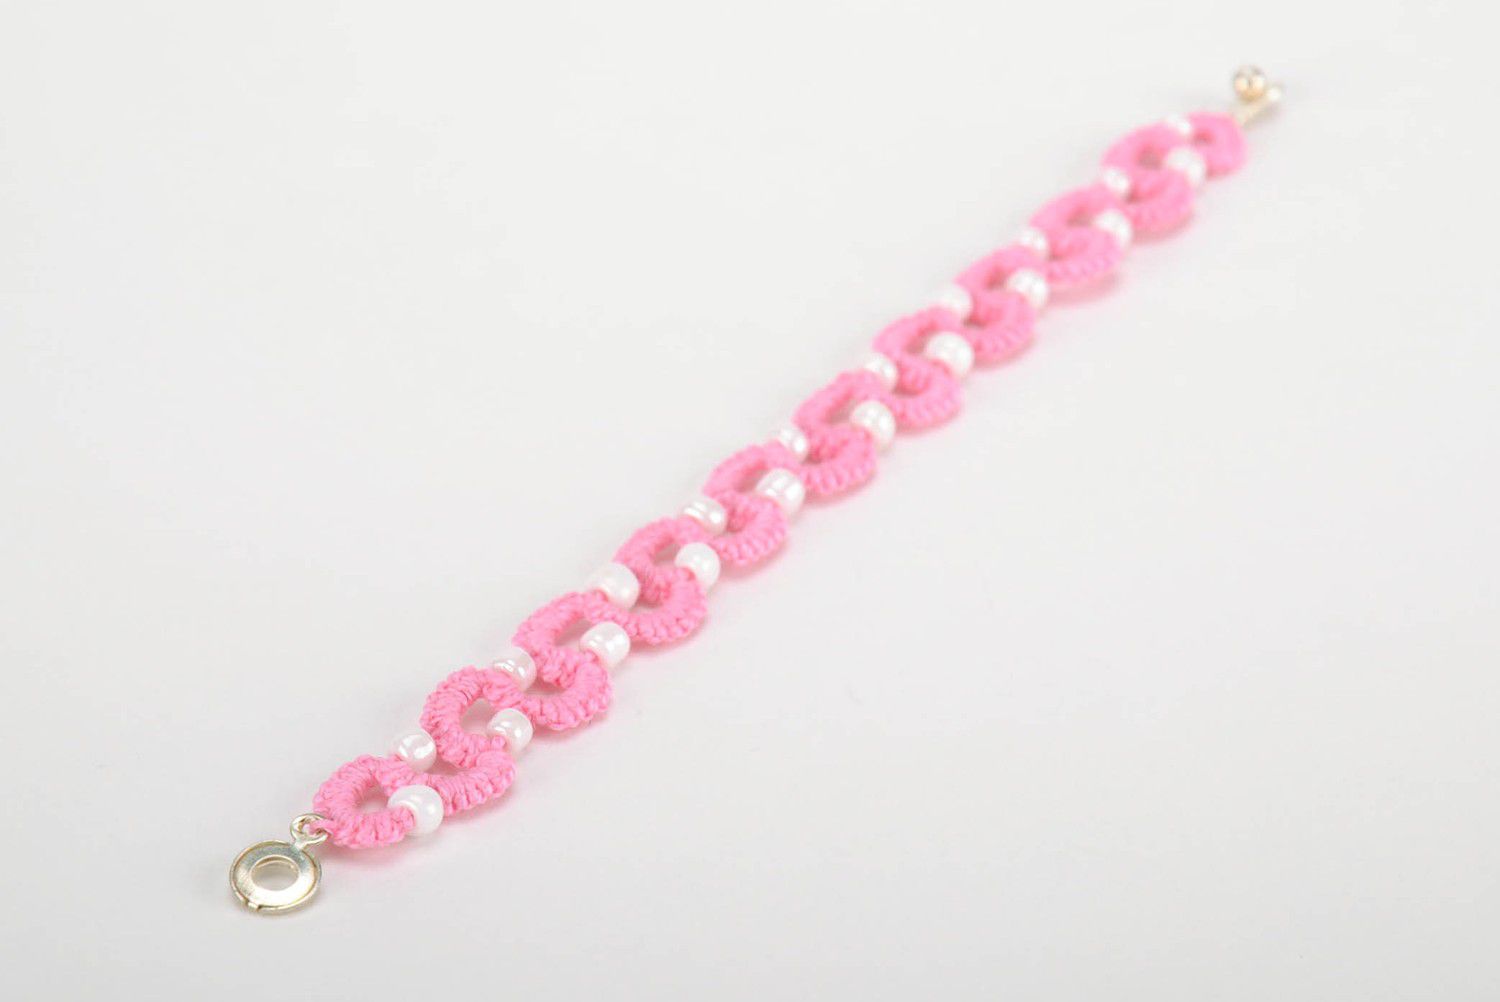 Bracelet braided from cotton threads white and pink photo 2